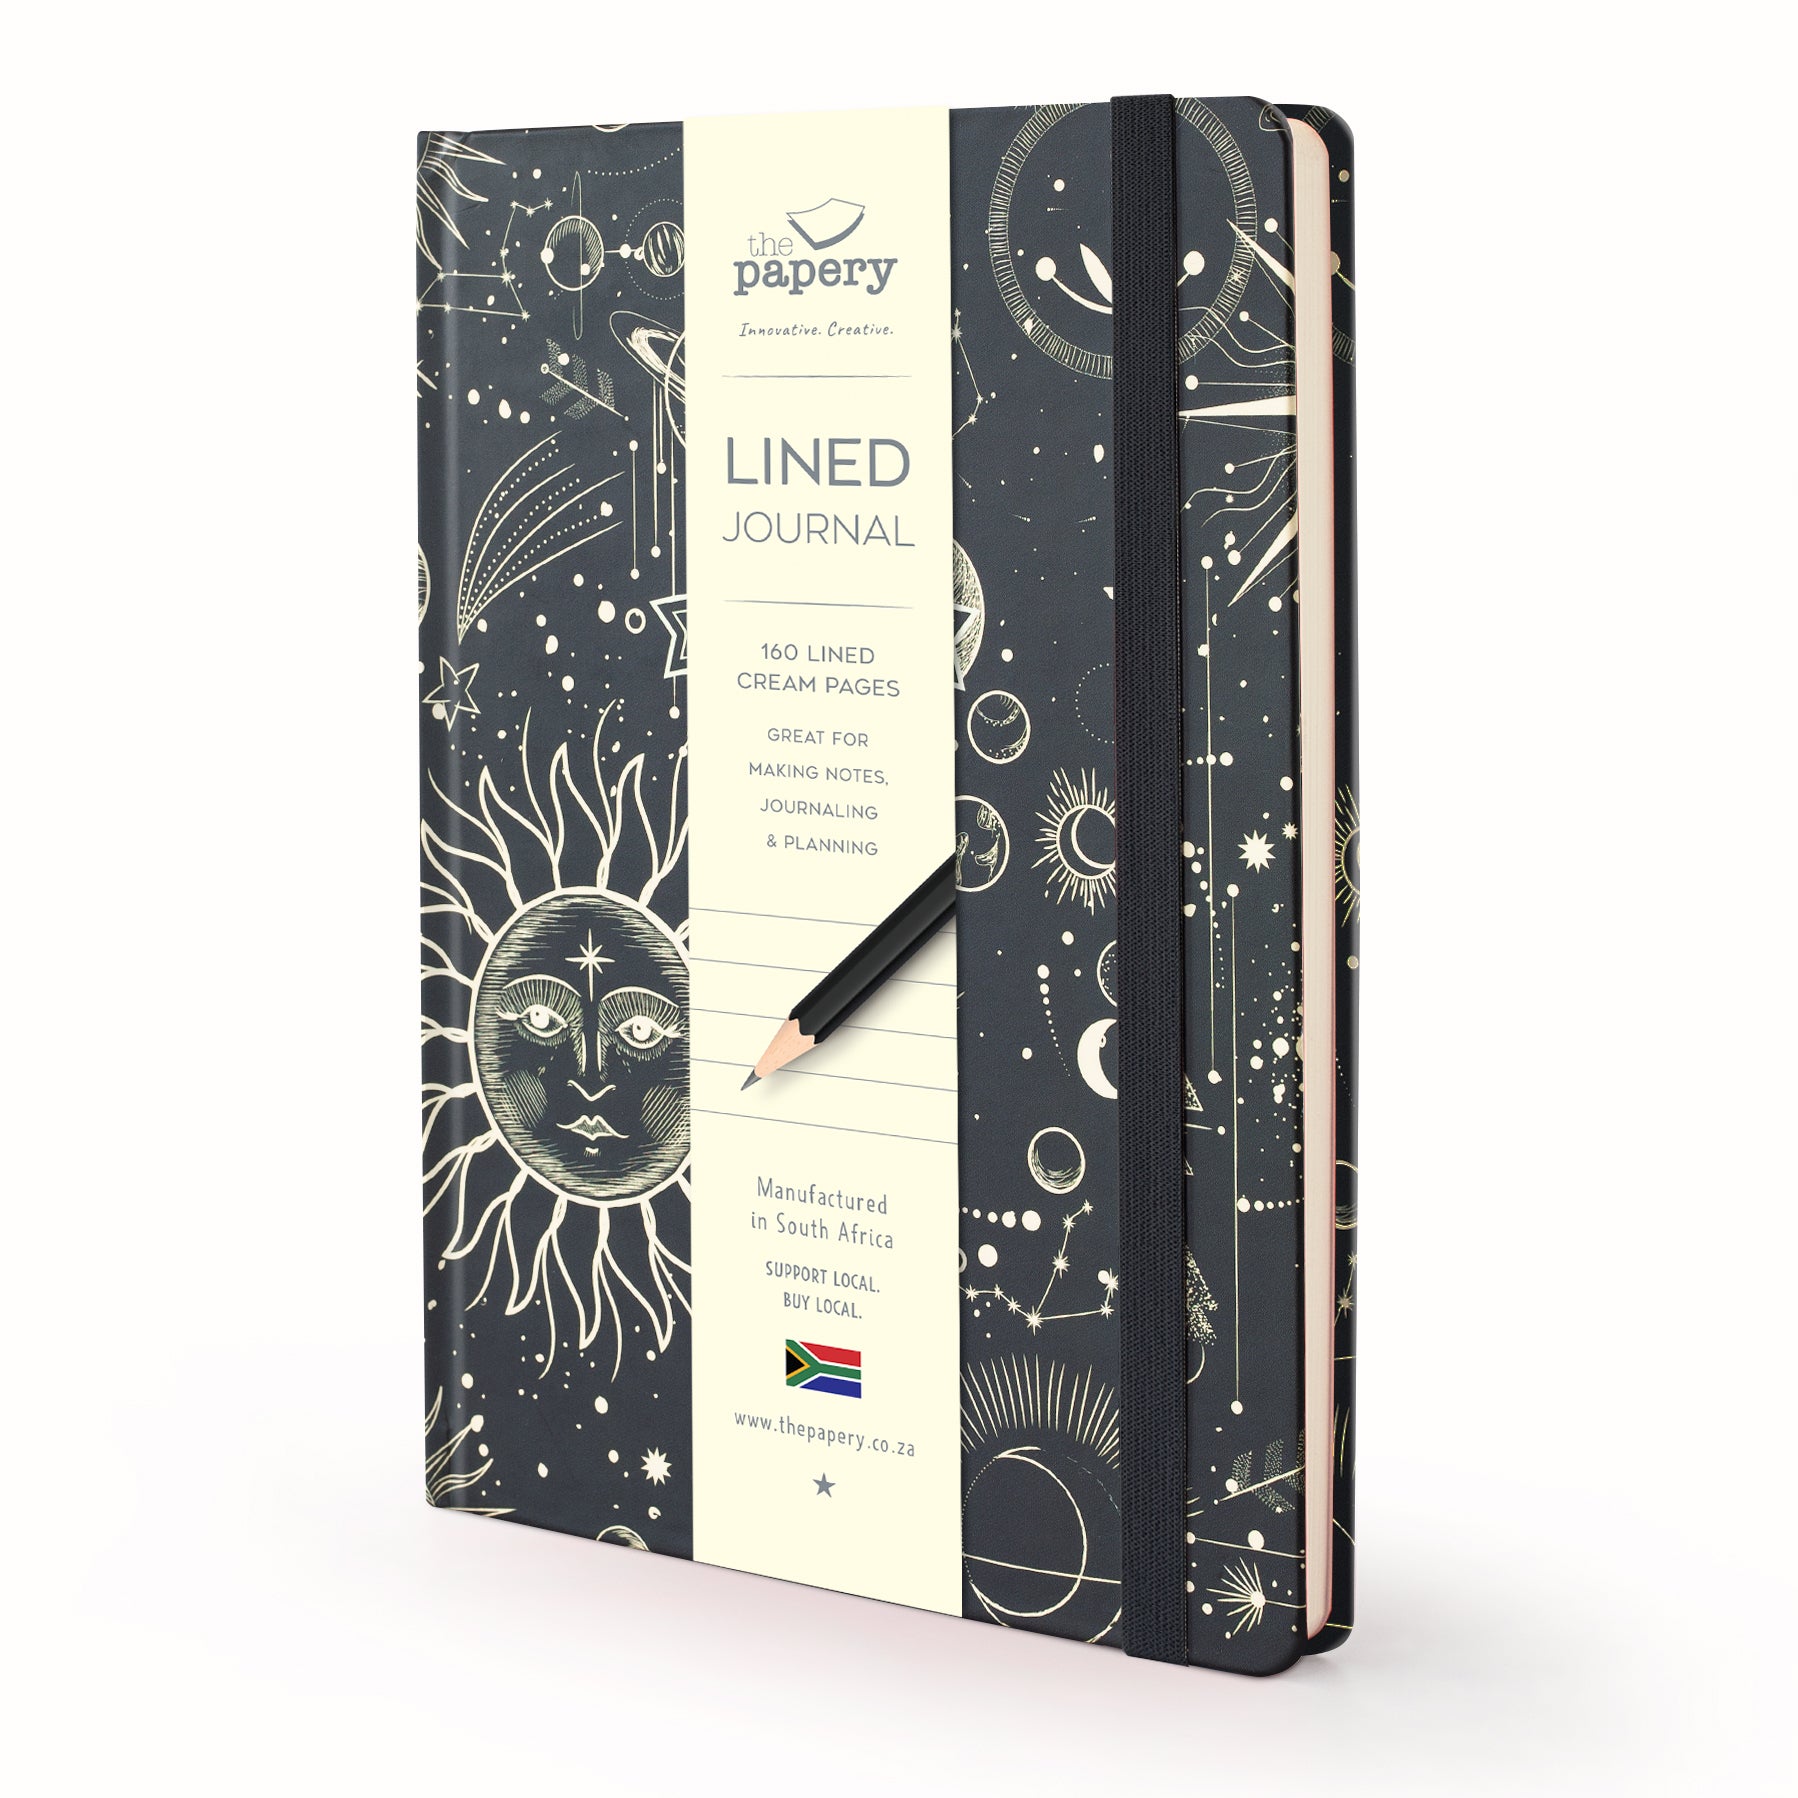 Image shows a retro sun moon stars lined journal